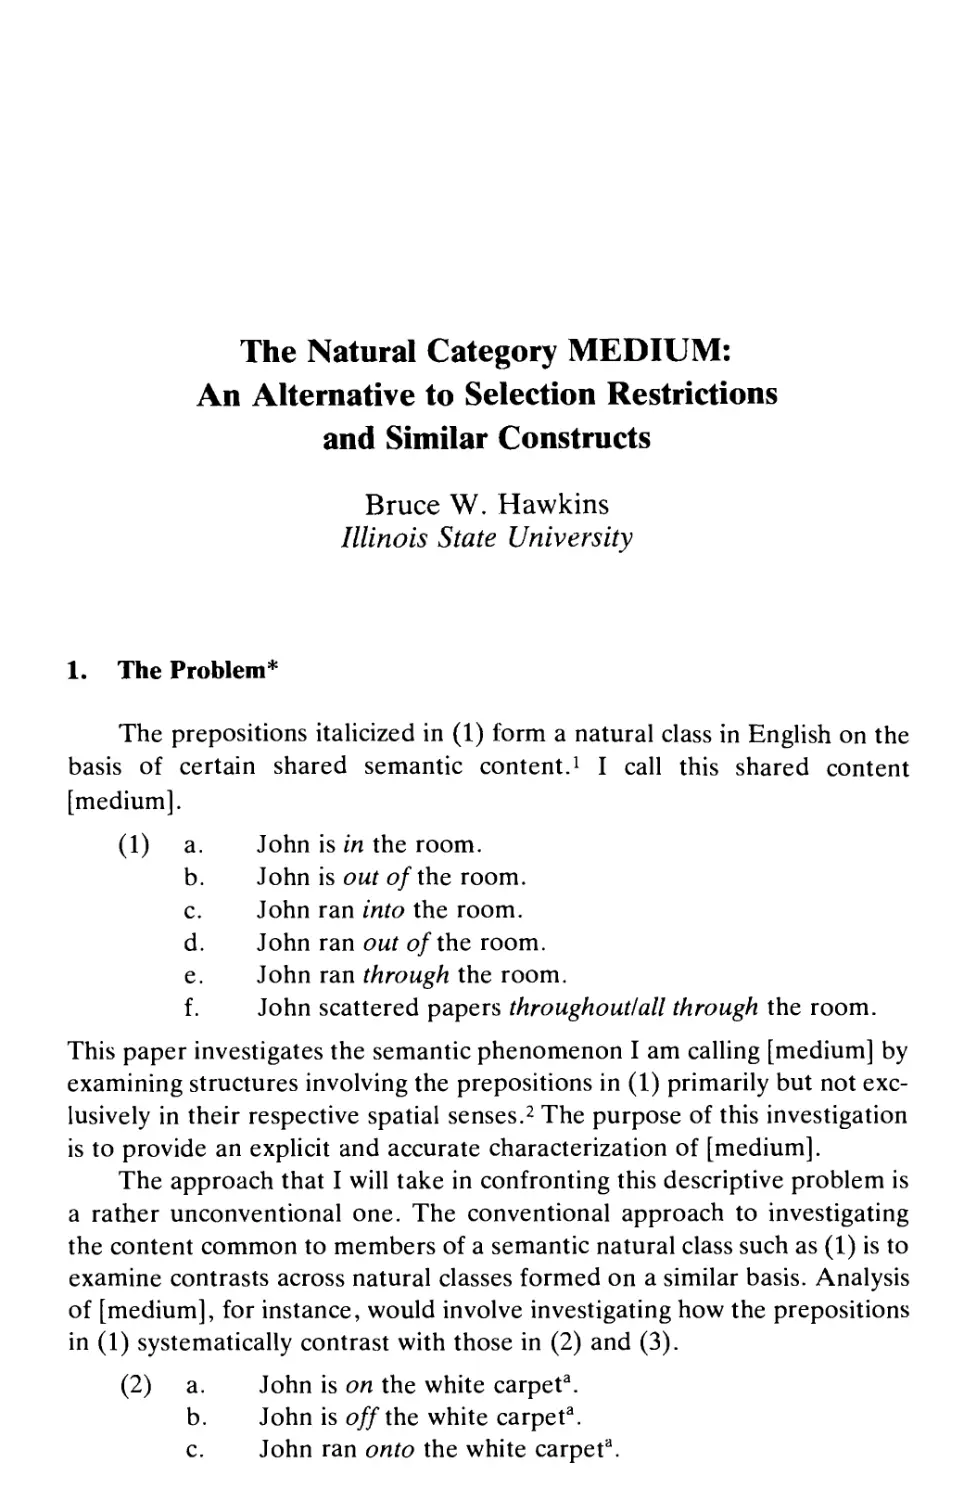 The Natural Category MEDIUM: An Alternative to Selection Restrictionsand Similar Constructs